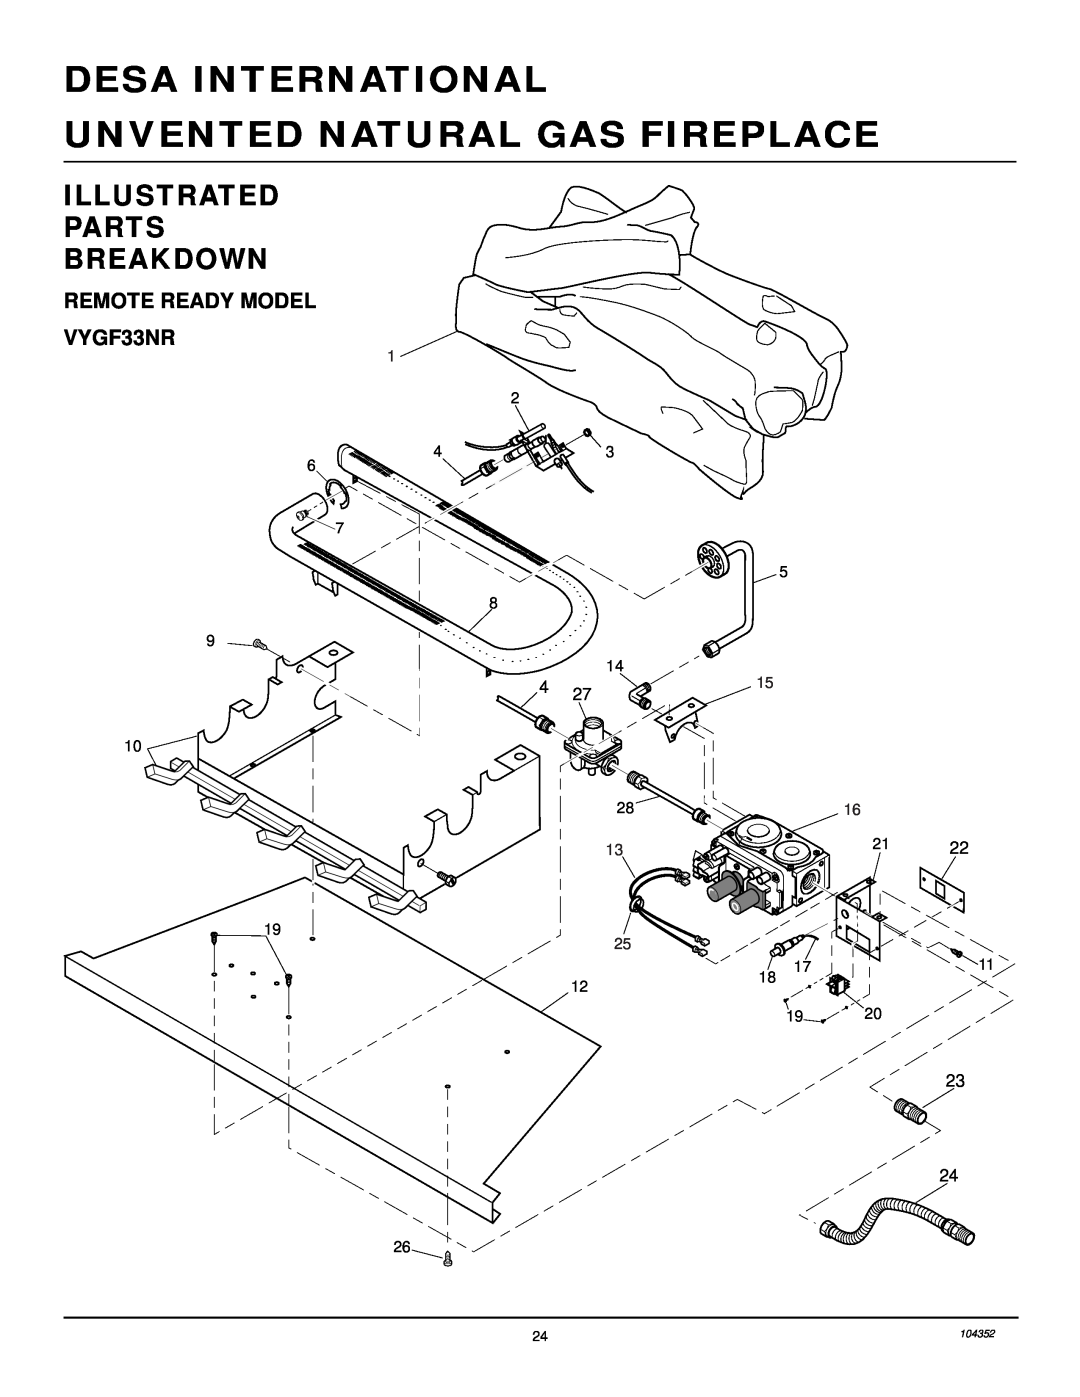 Desa Illustrated Parts Breakdown, REMOTE READY MODEL VYGF33NR, Desa International Unvented Natural Gas Fireplace 